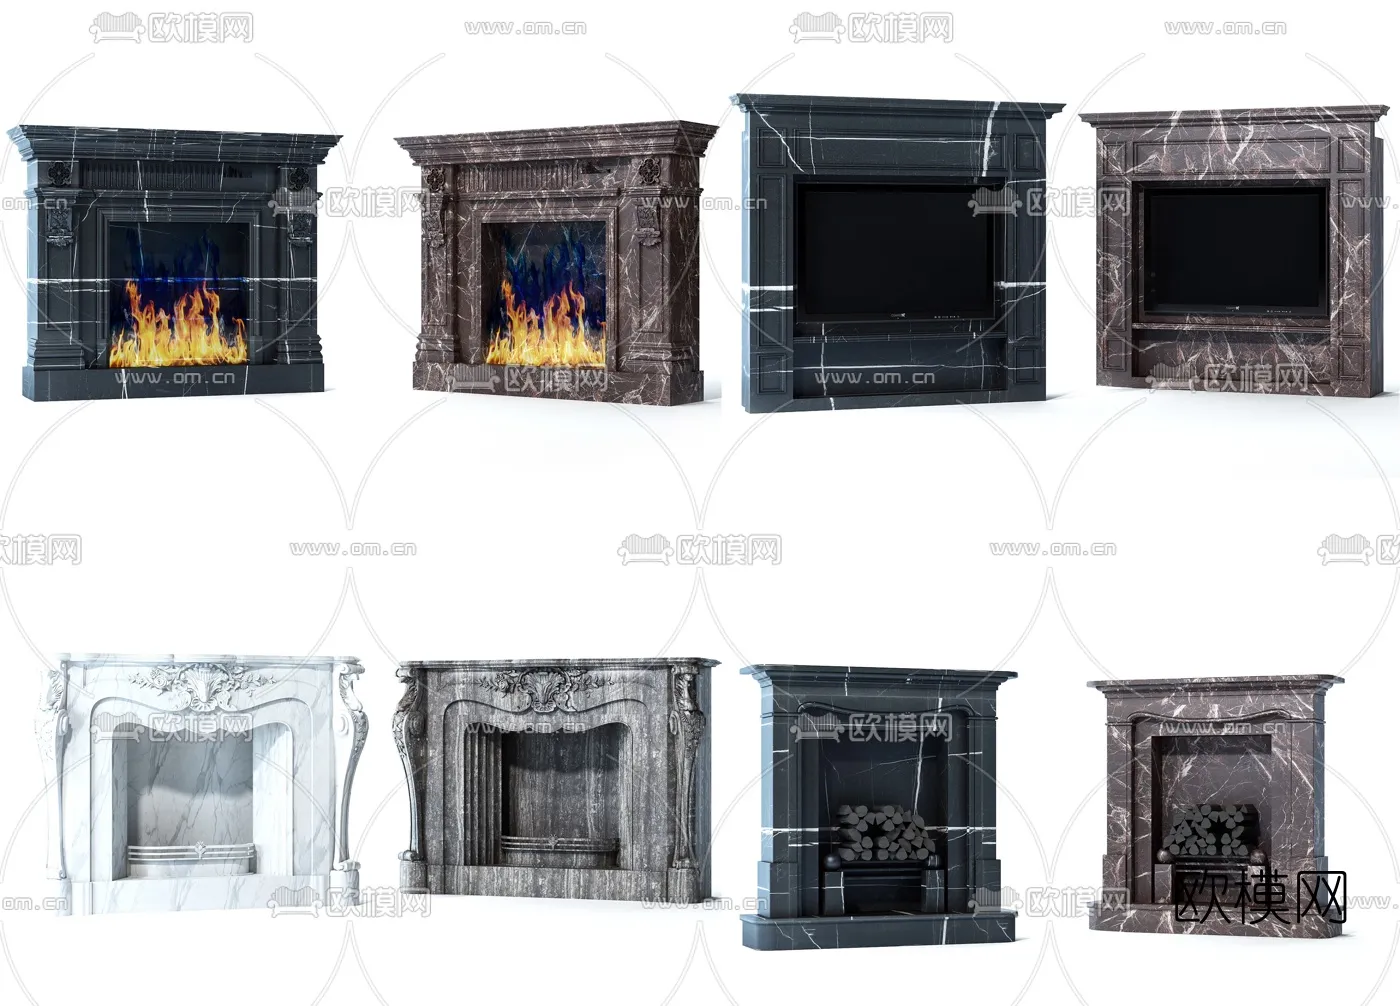 CLASSIC – FIREPLACE 3DMODELS – 014